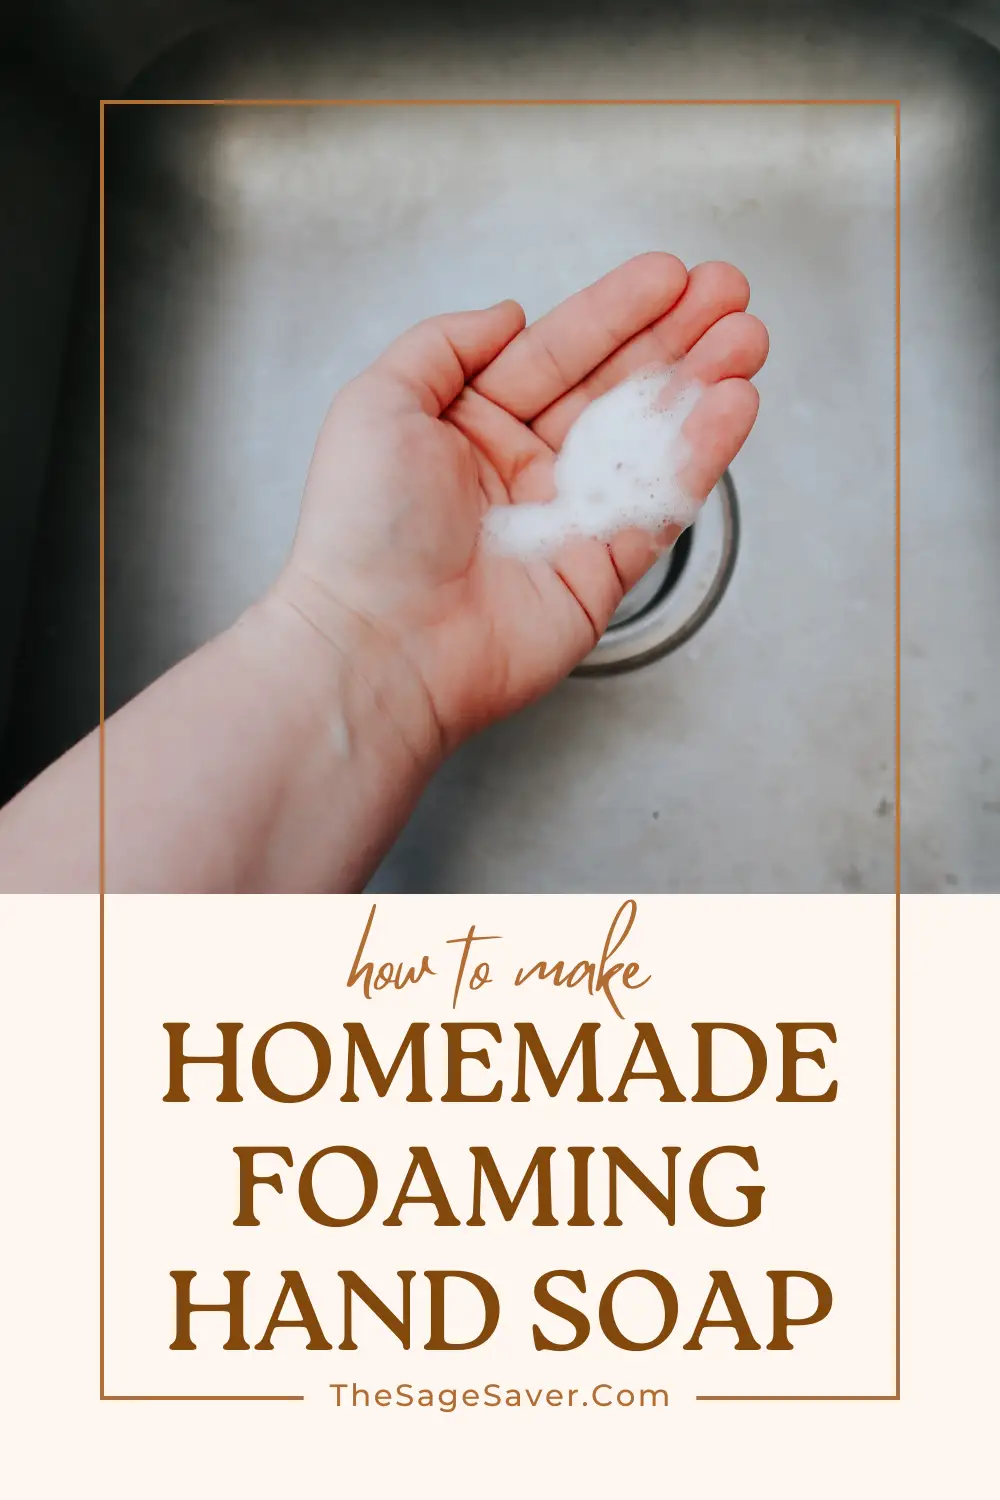 How to Make Homemade Foaming Hand Soap